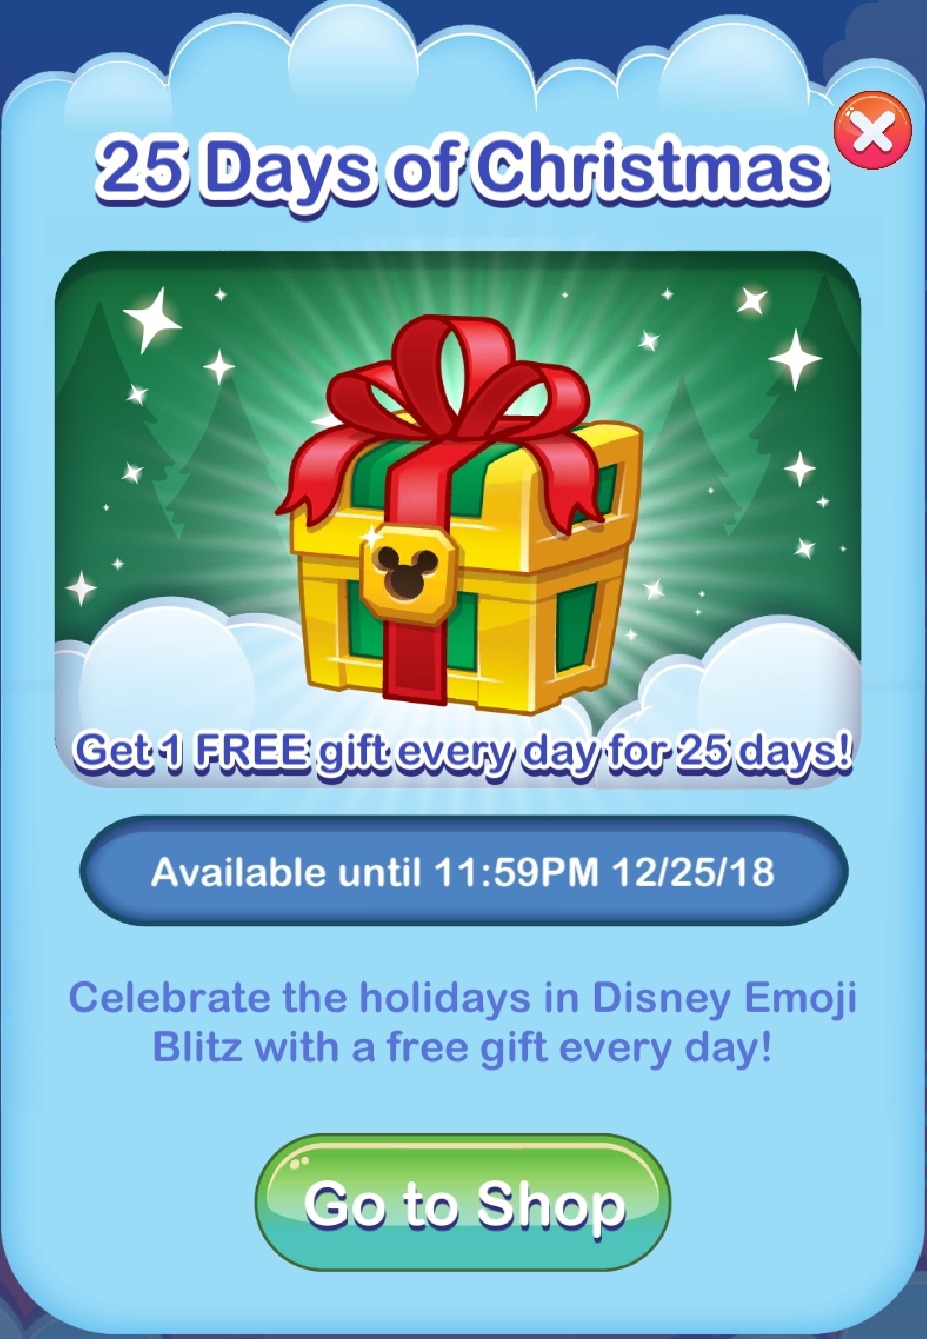 For anyone who plays Disney Emoji Blitz, they&rsquo;re doing an advent calendar